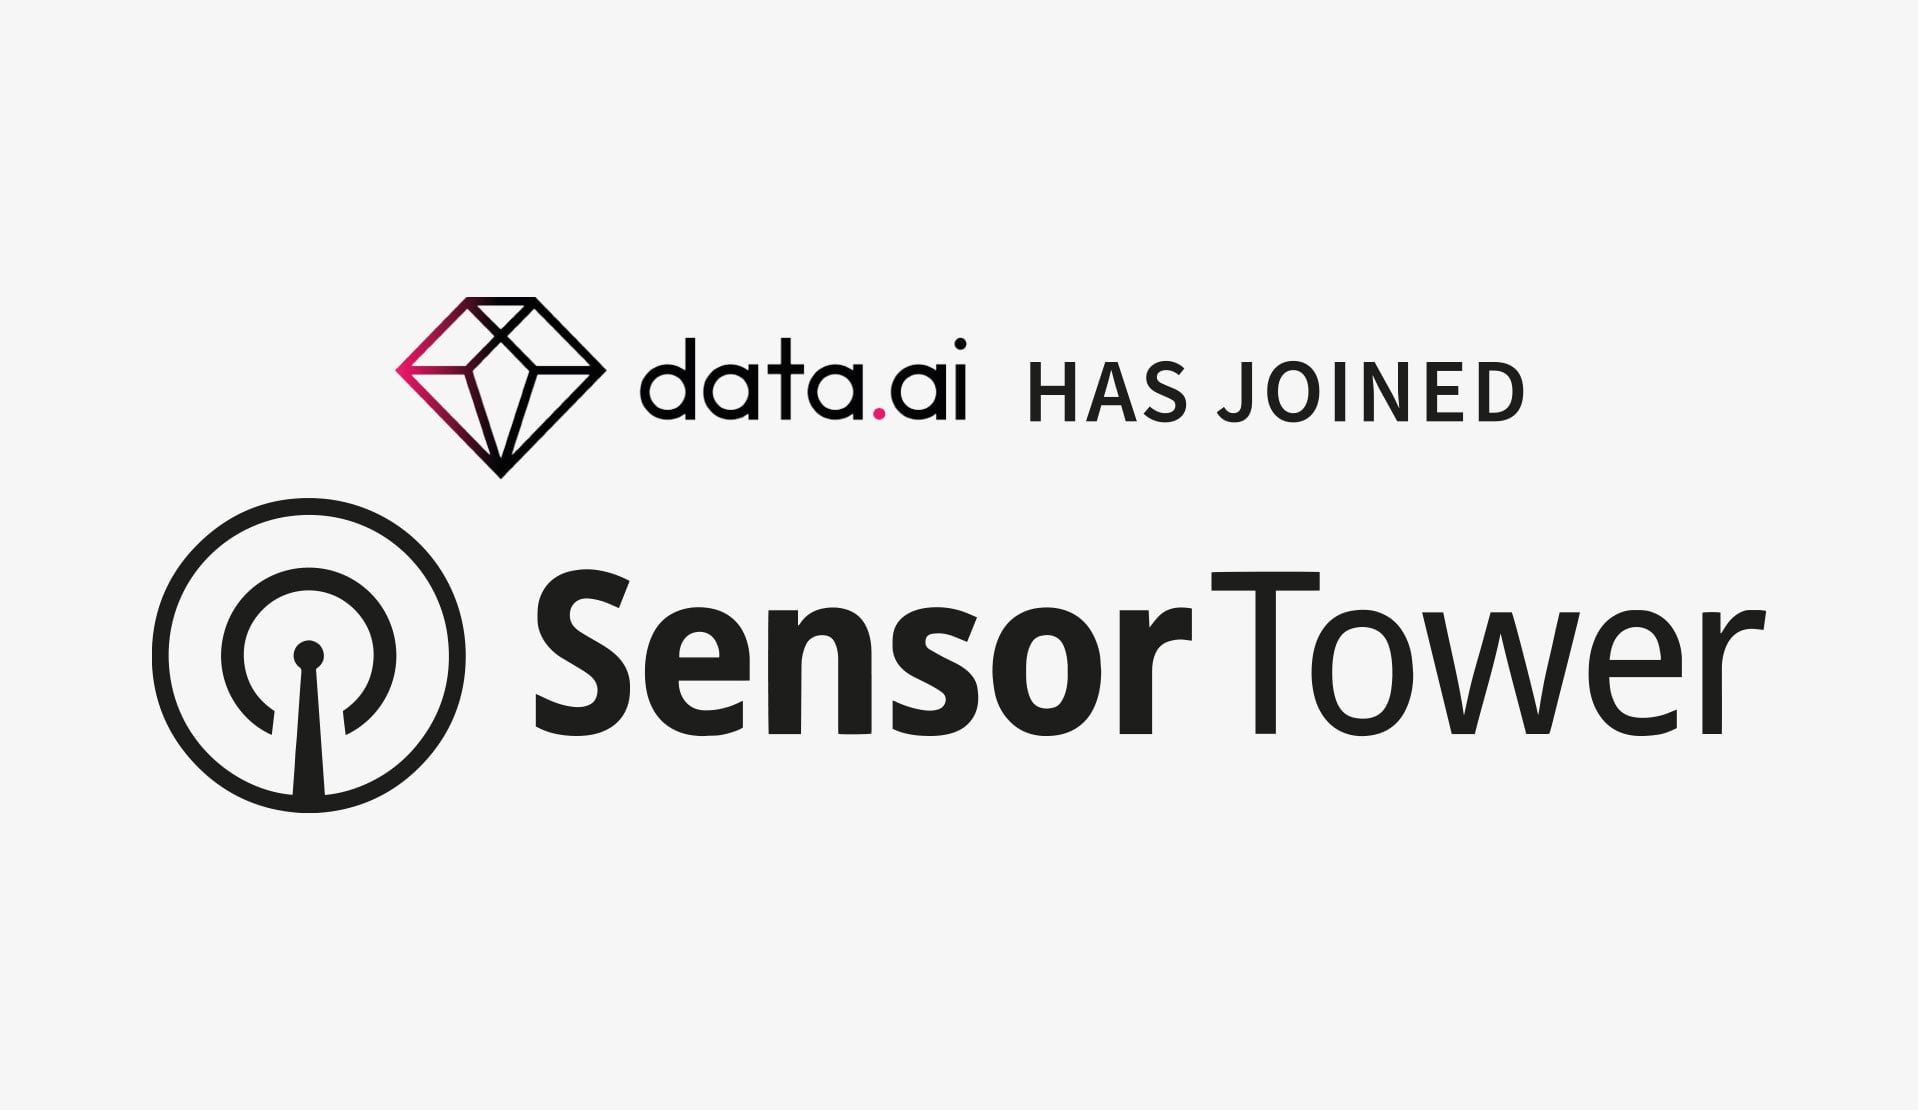 data.ai joins st 